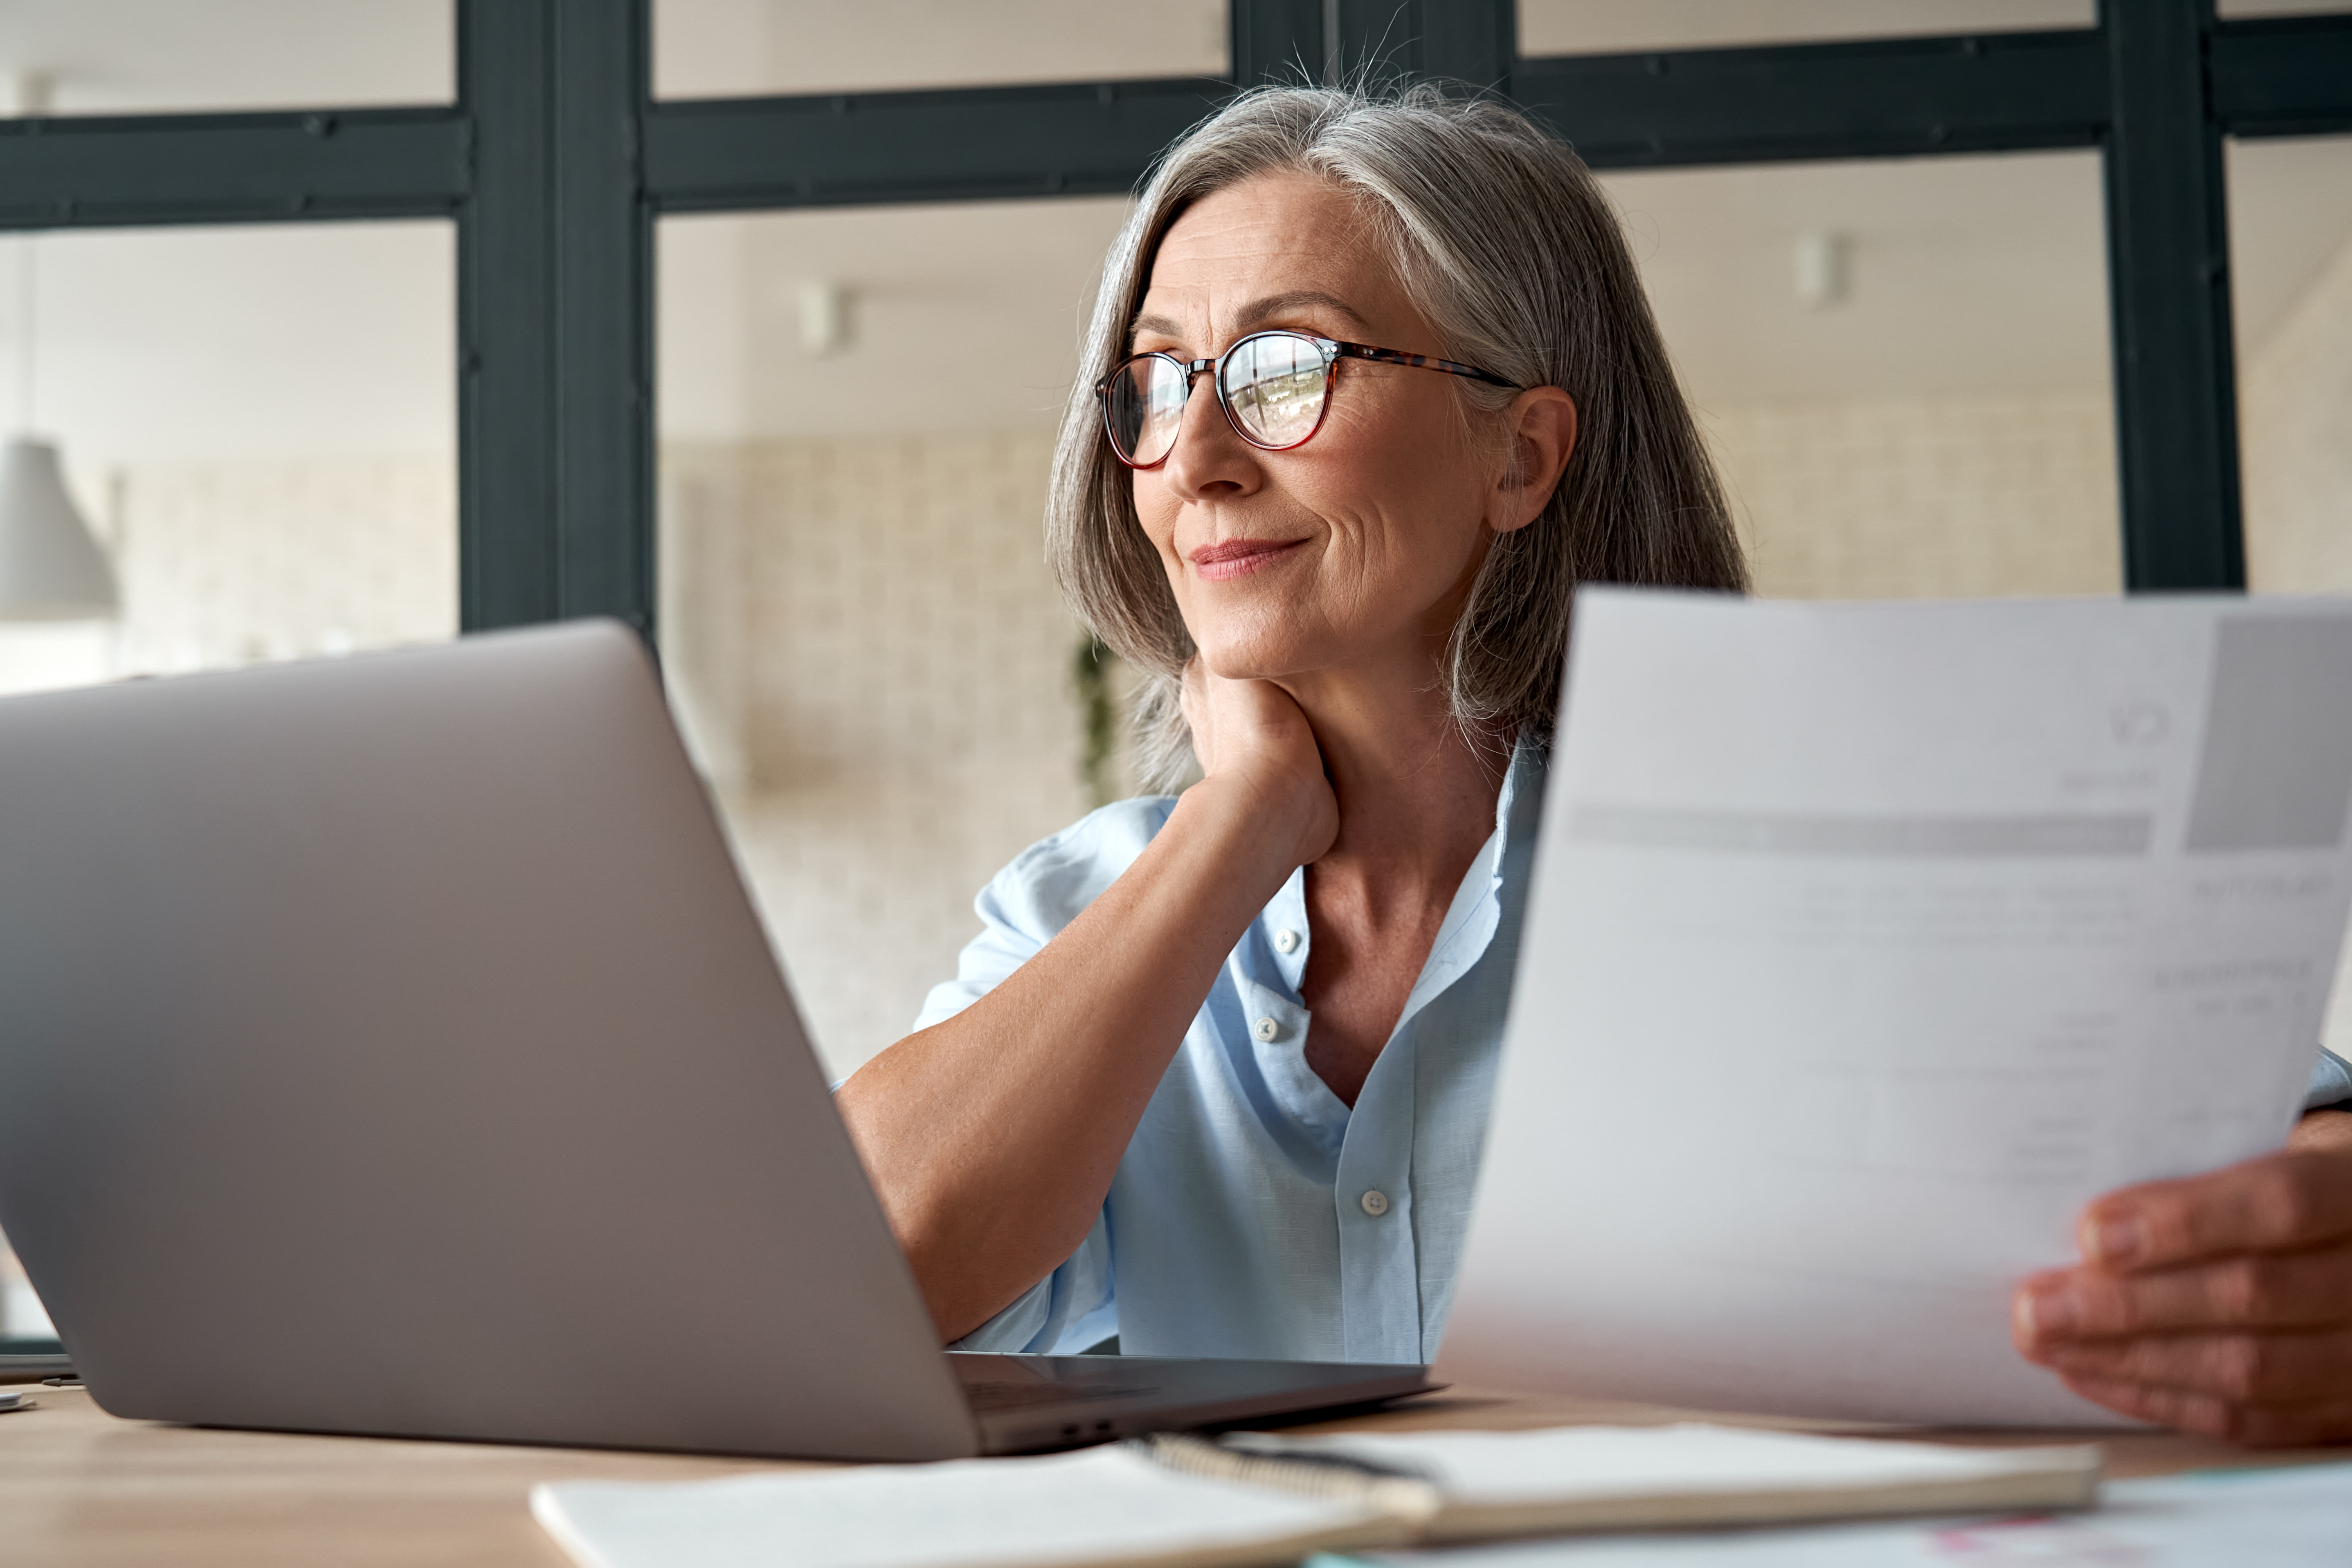 Smiling mature middle aged business woman holding cv searching job online.